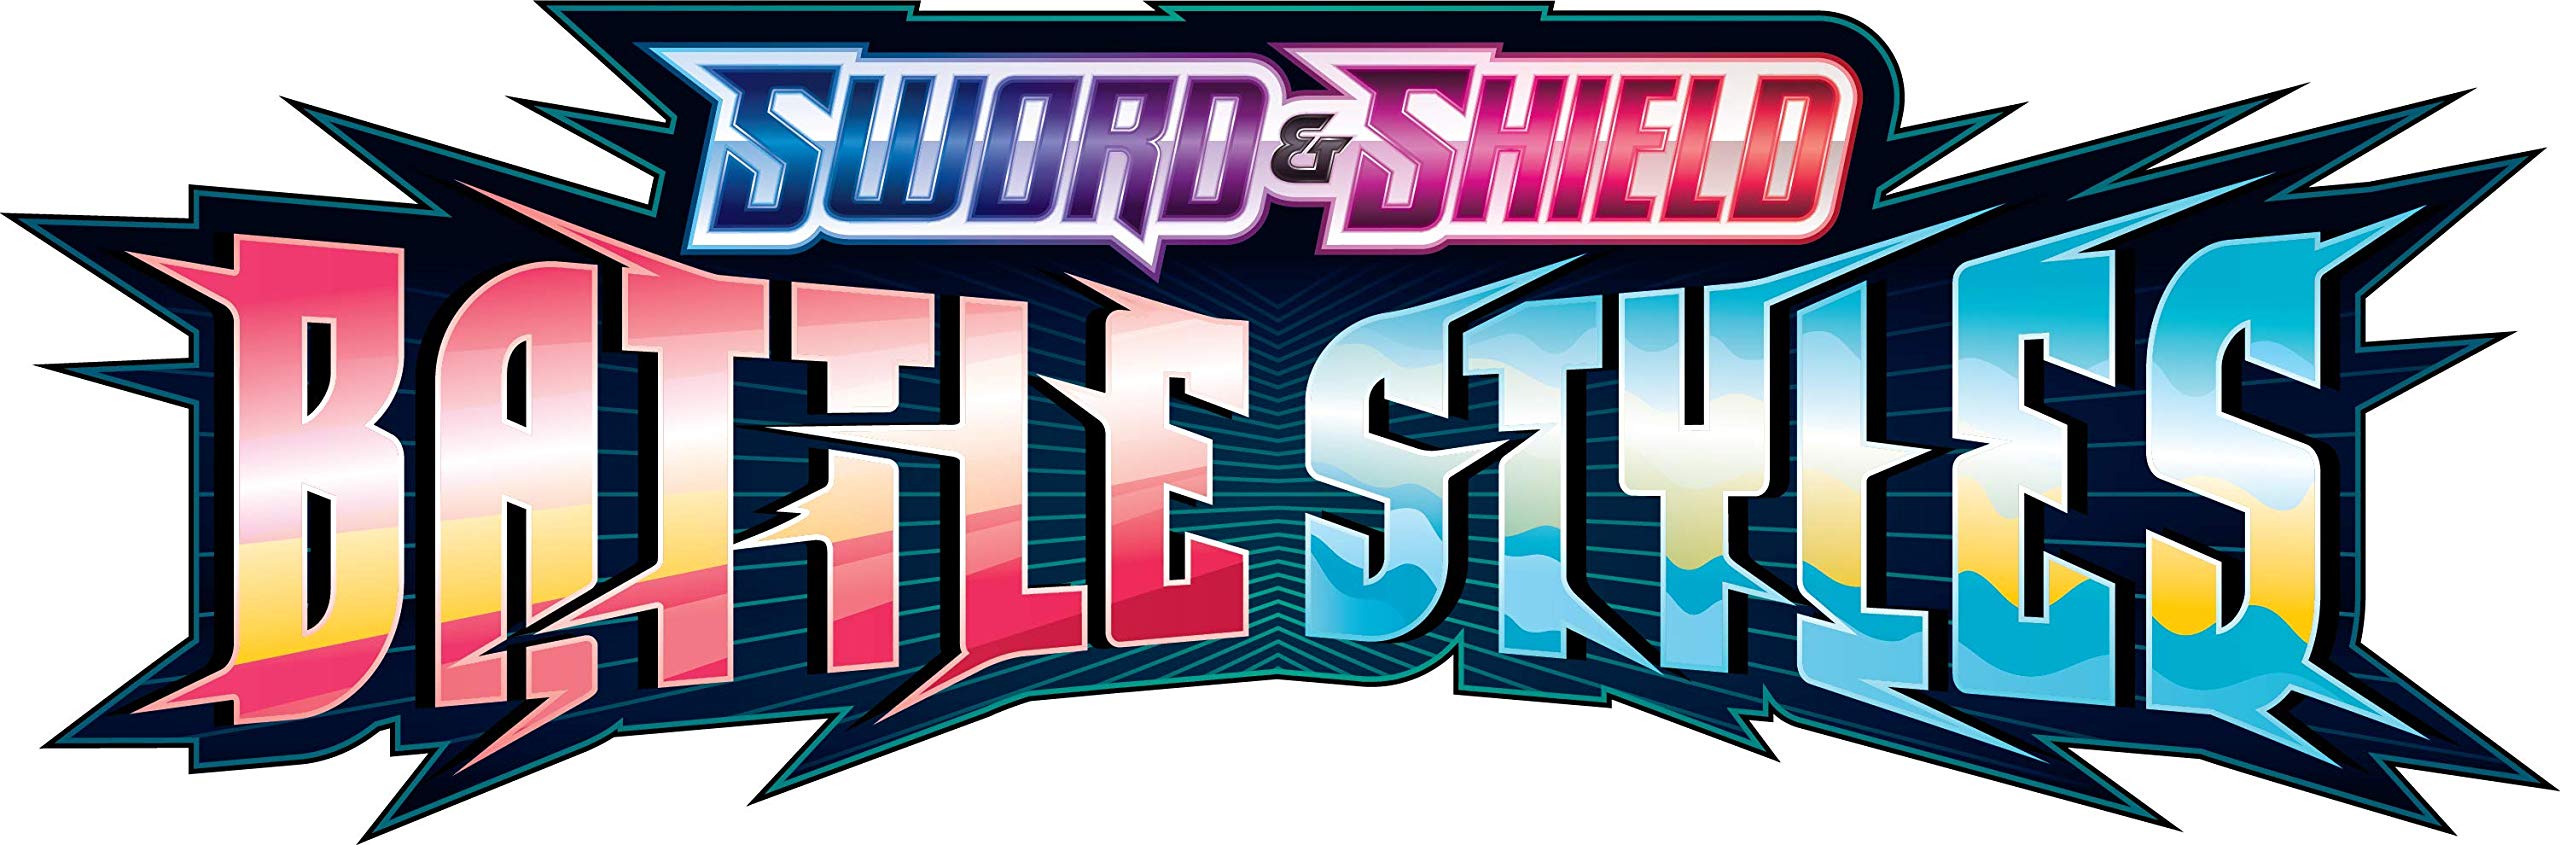 Pokemon TCG: Sword & Shield Battle Styles Blister Pack with 3 Booster Packs (Random Draw, one of Evee or Jolteon)